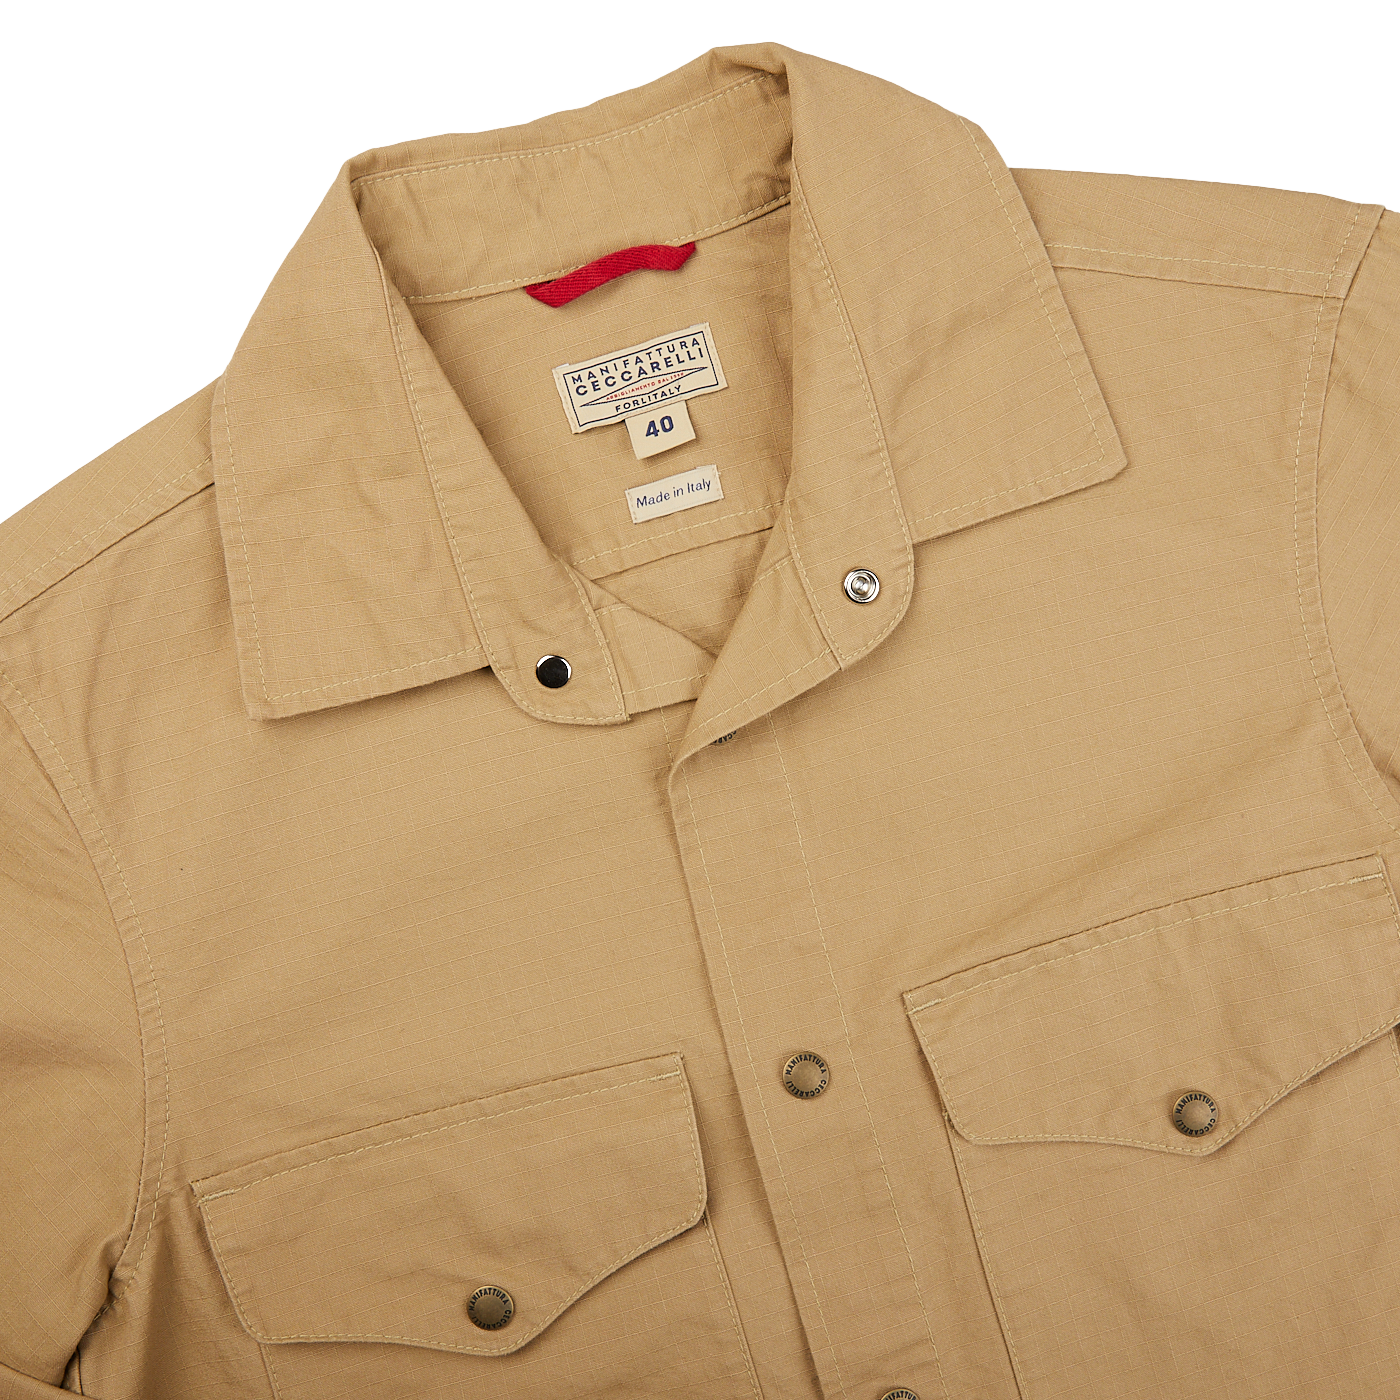 The Camel Beige Cotton Ripstop Country Overshirt in tan by Manifattura Ceccarelli.